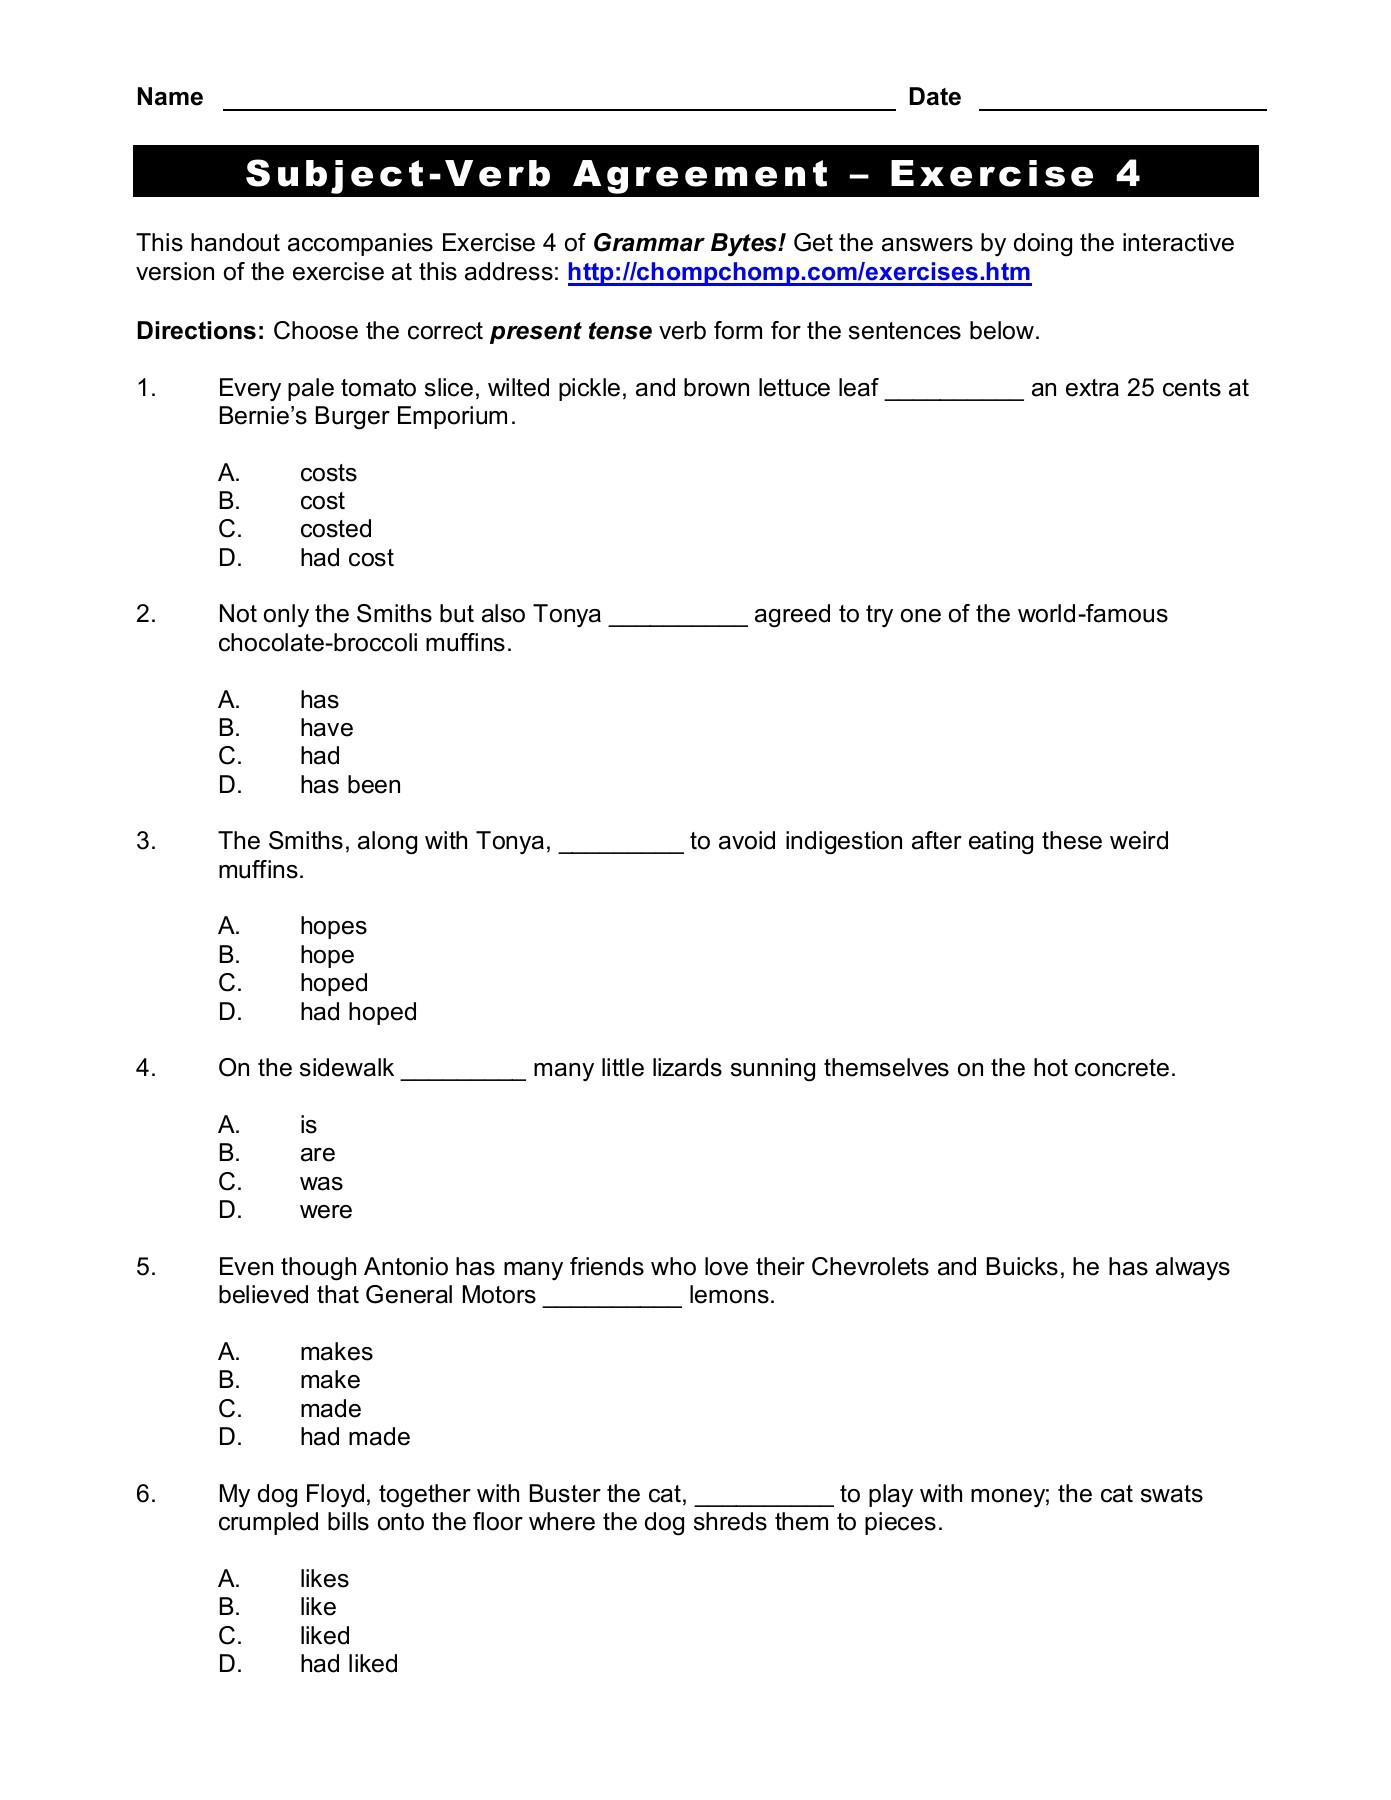 subject-and-verb-agreement-worksheet-db-excel